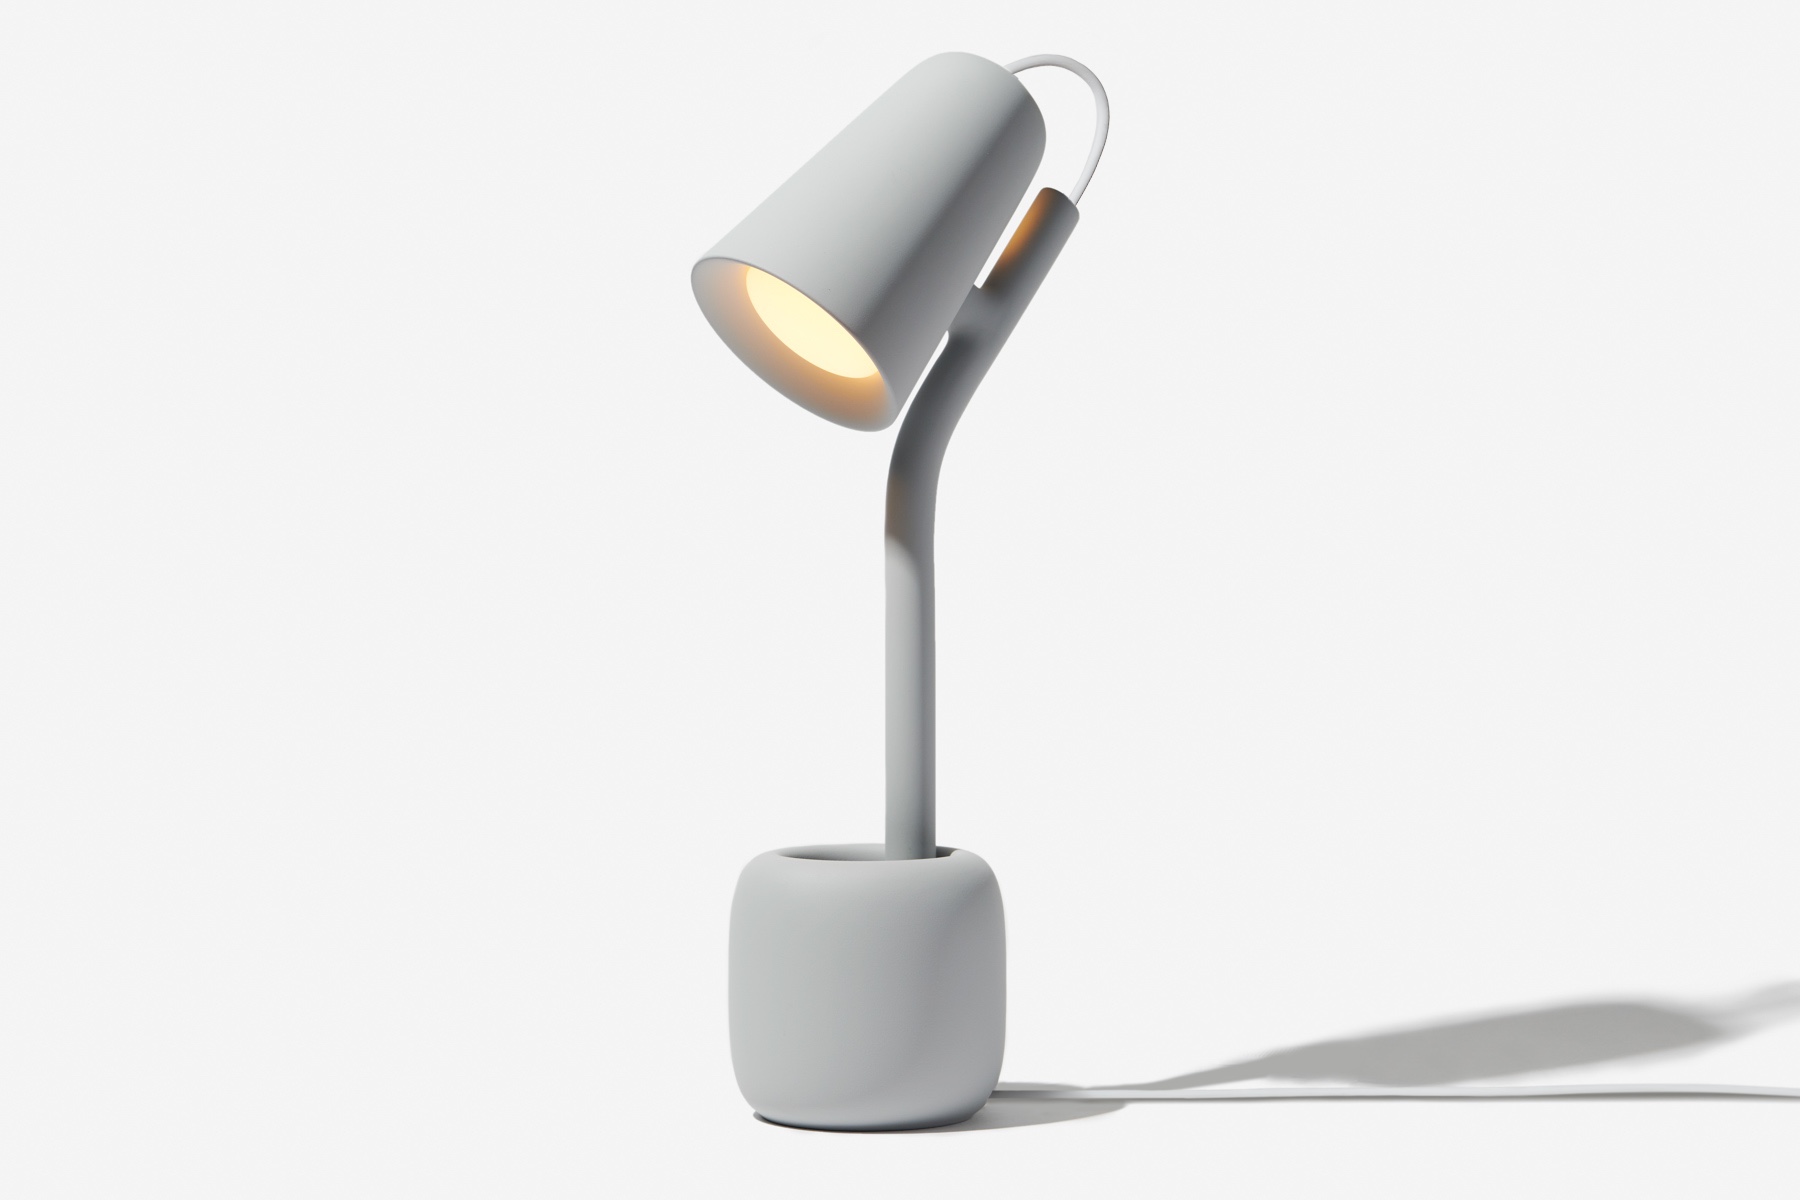 Ammunition and Gantri 3D print lamps from plant-based materials